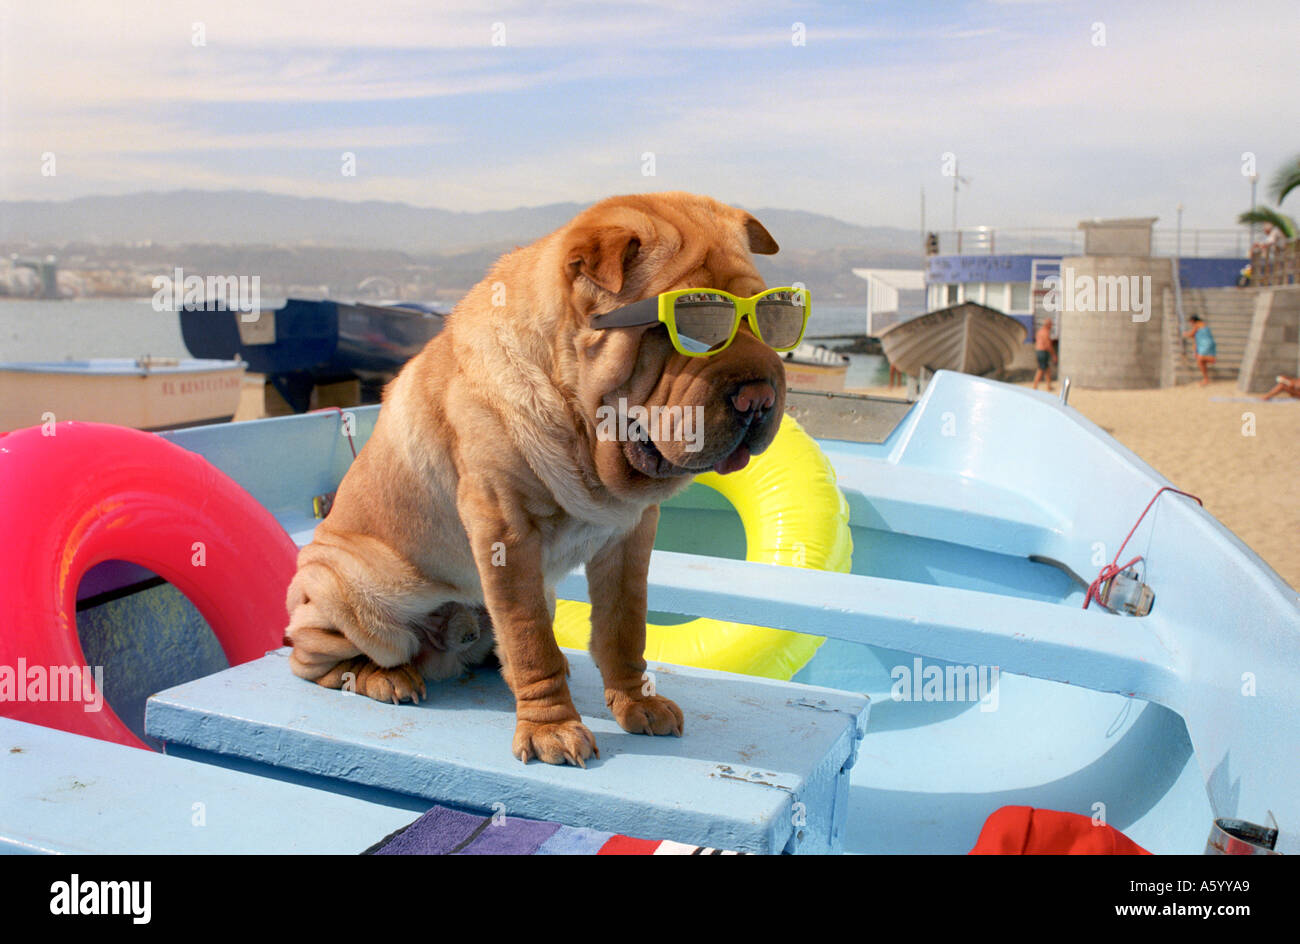 Holiday Dog wearing sunglasses on holiday sitting in colourful fishing boat on beach Stock Photo